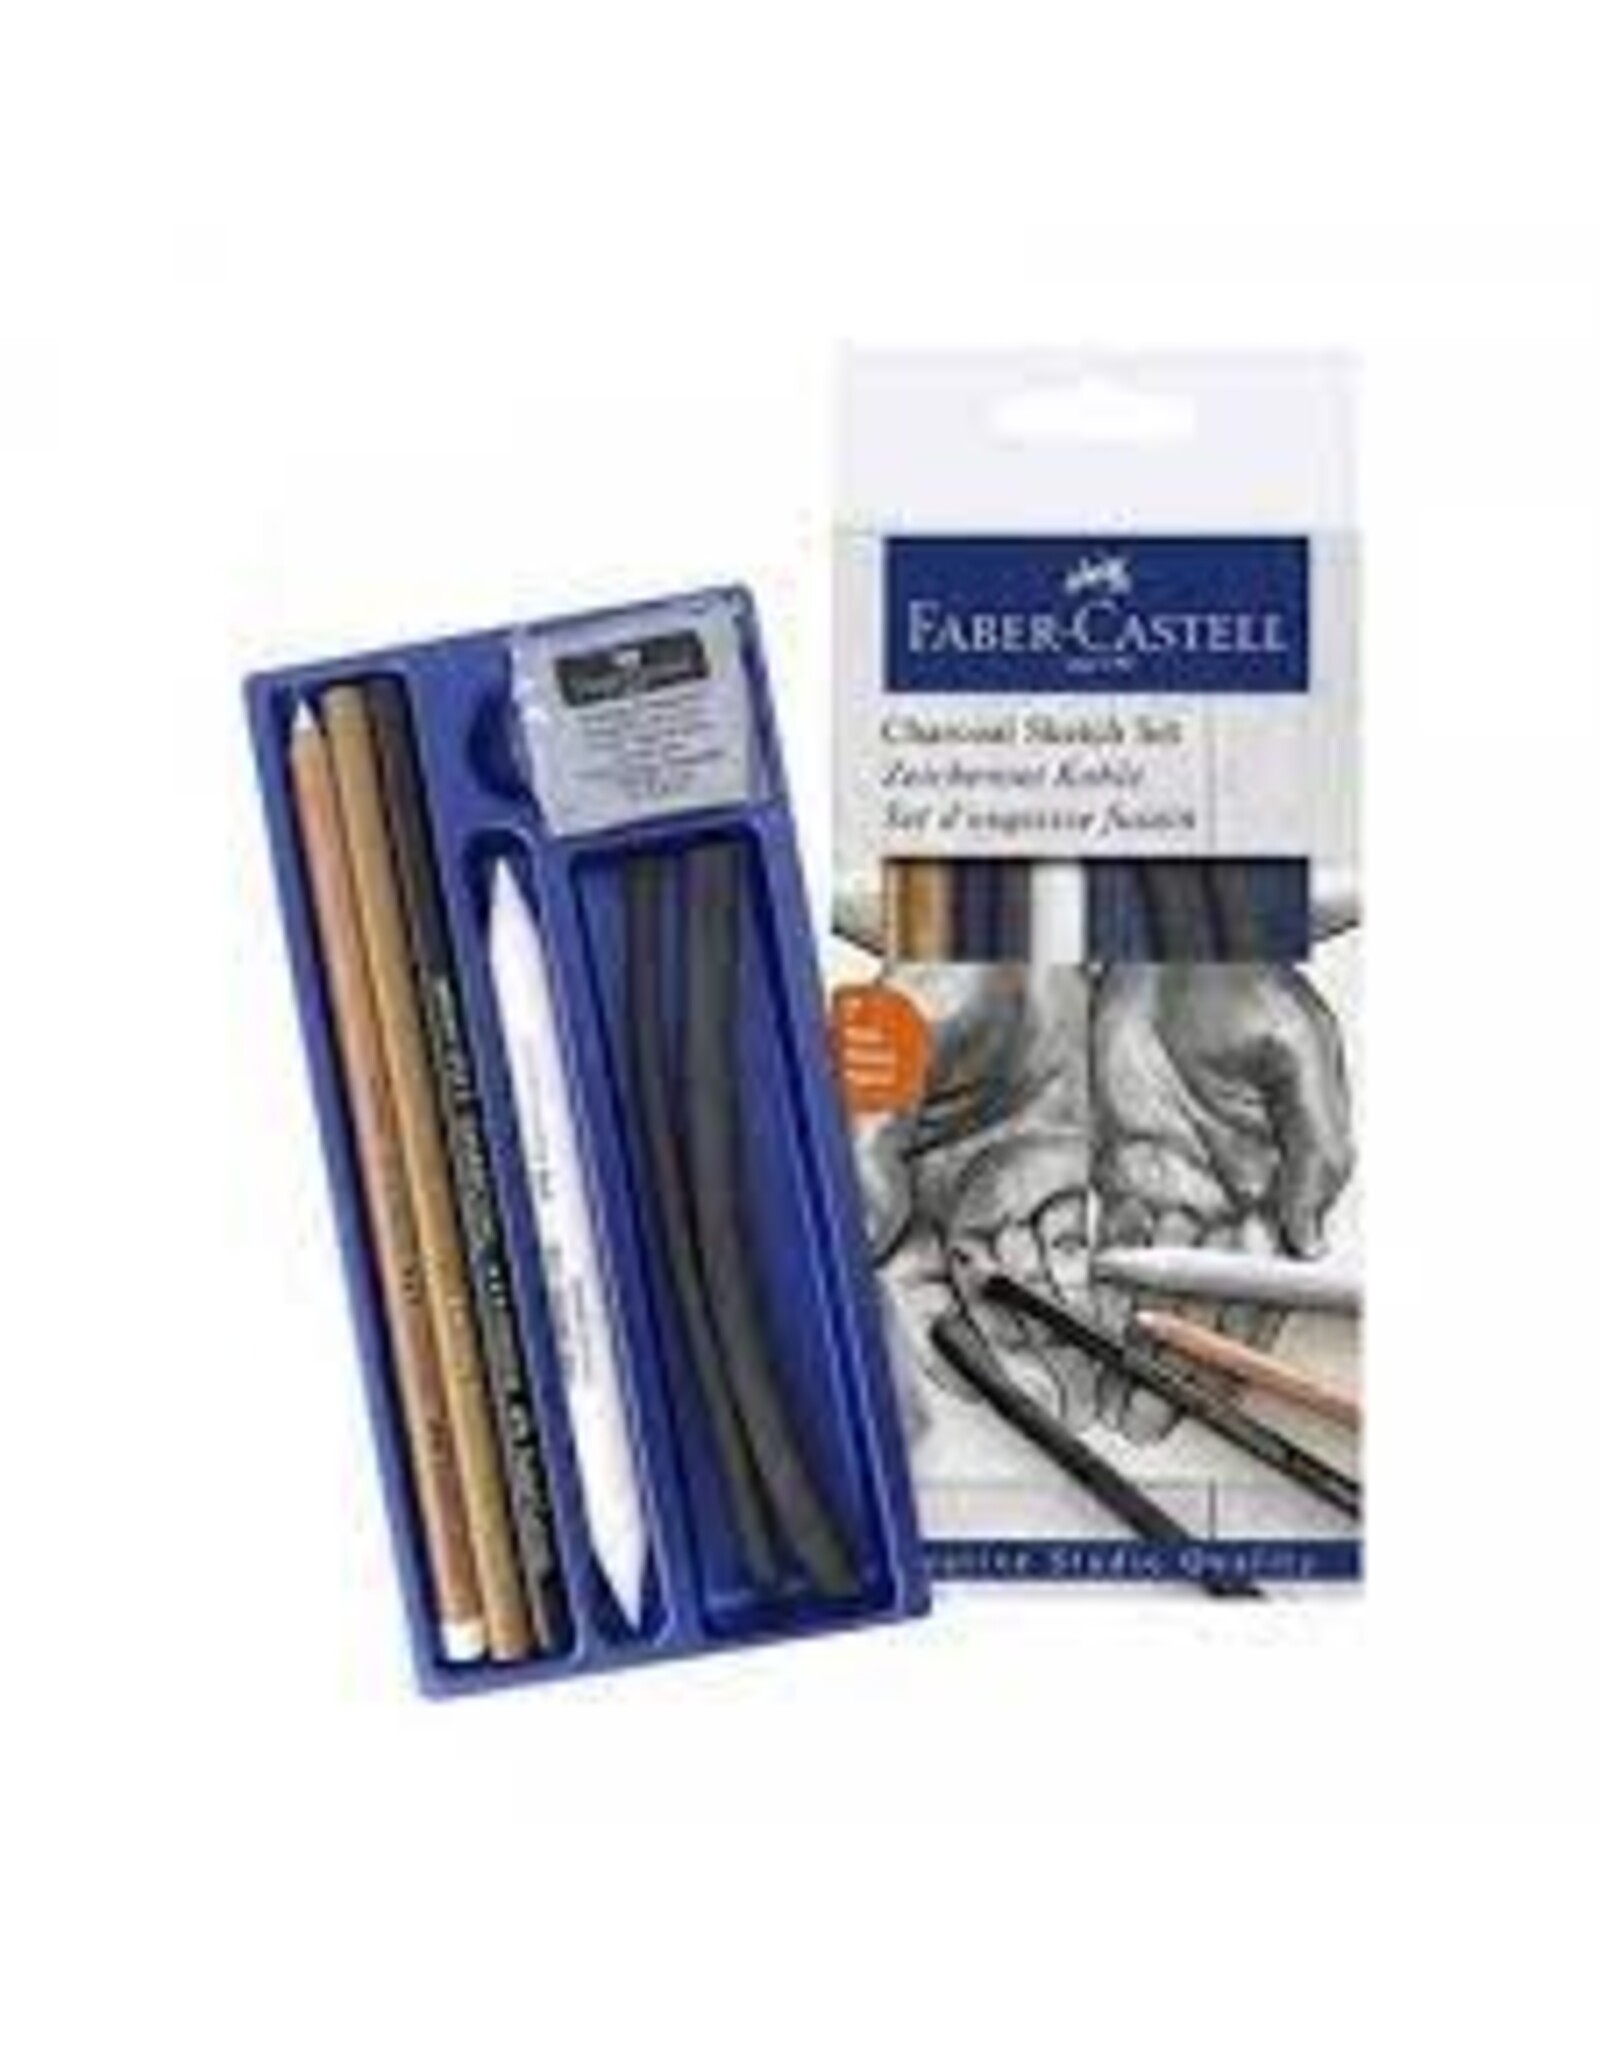 Faber-Castell Box - 7ct Charcoal Sketch Set (2 Charcoal pencils,